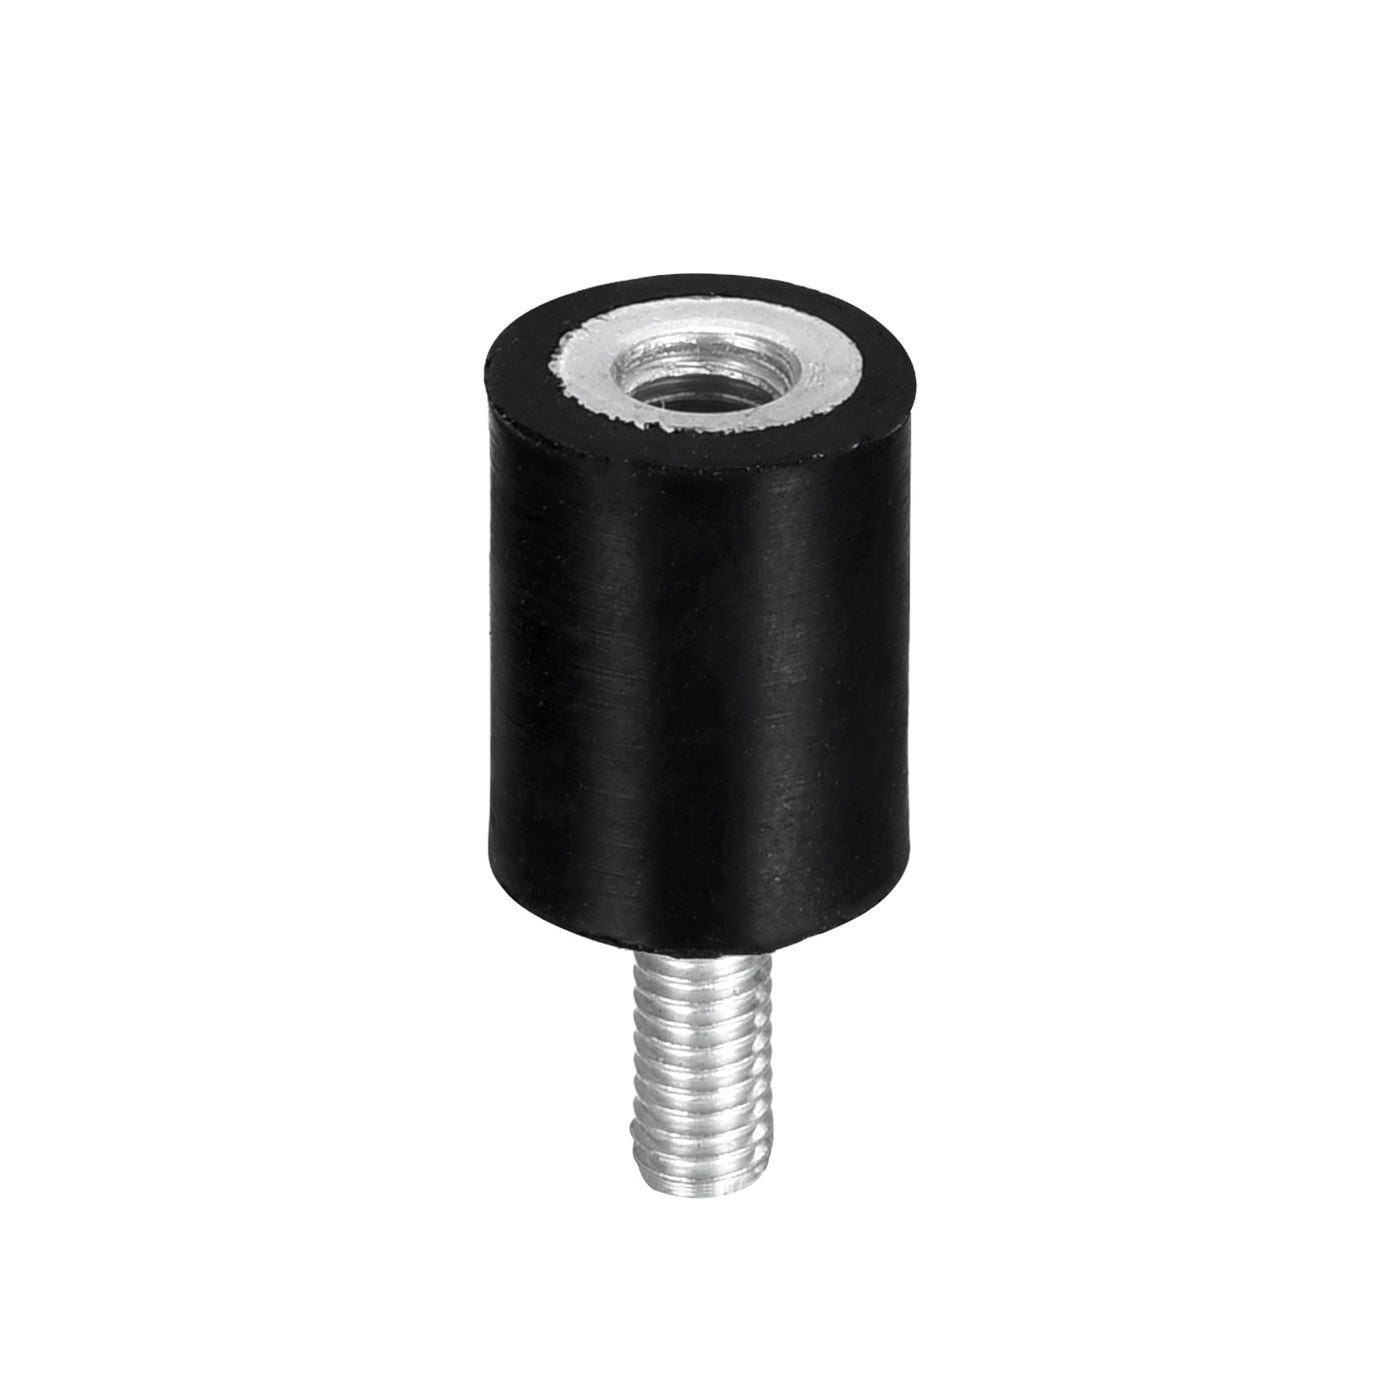 uxcell Uxcell Rubber Mount M6 Male/Female Vibration Isolator Shock Absorber, D20mmxH30mm